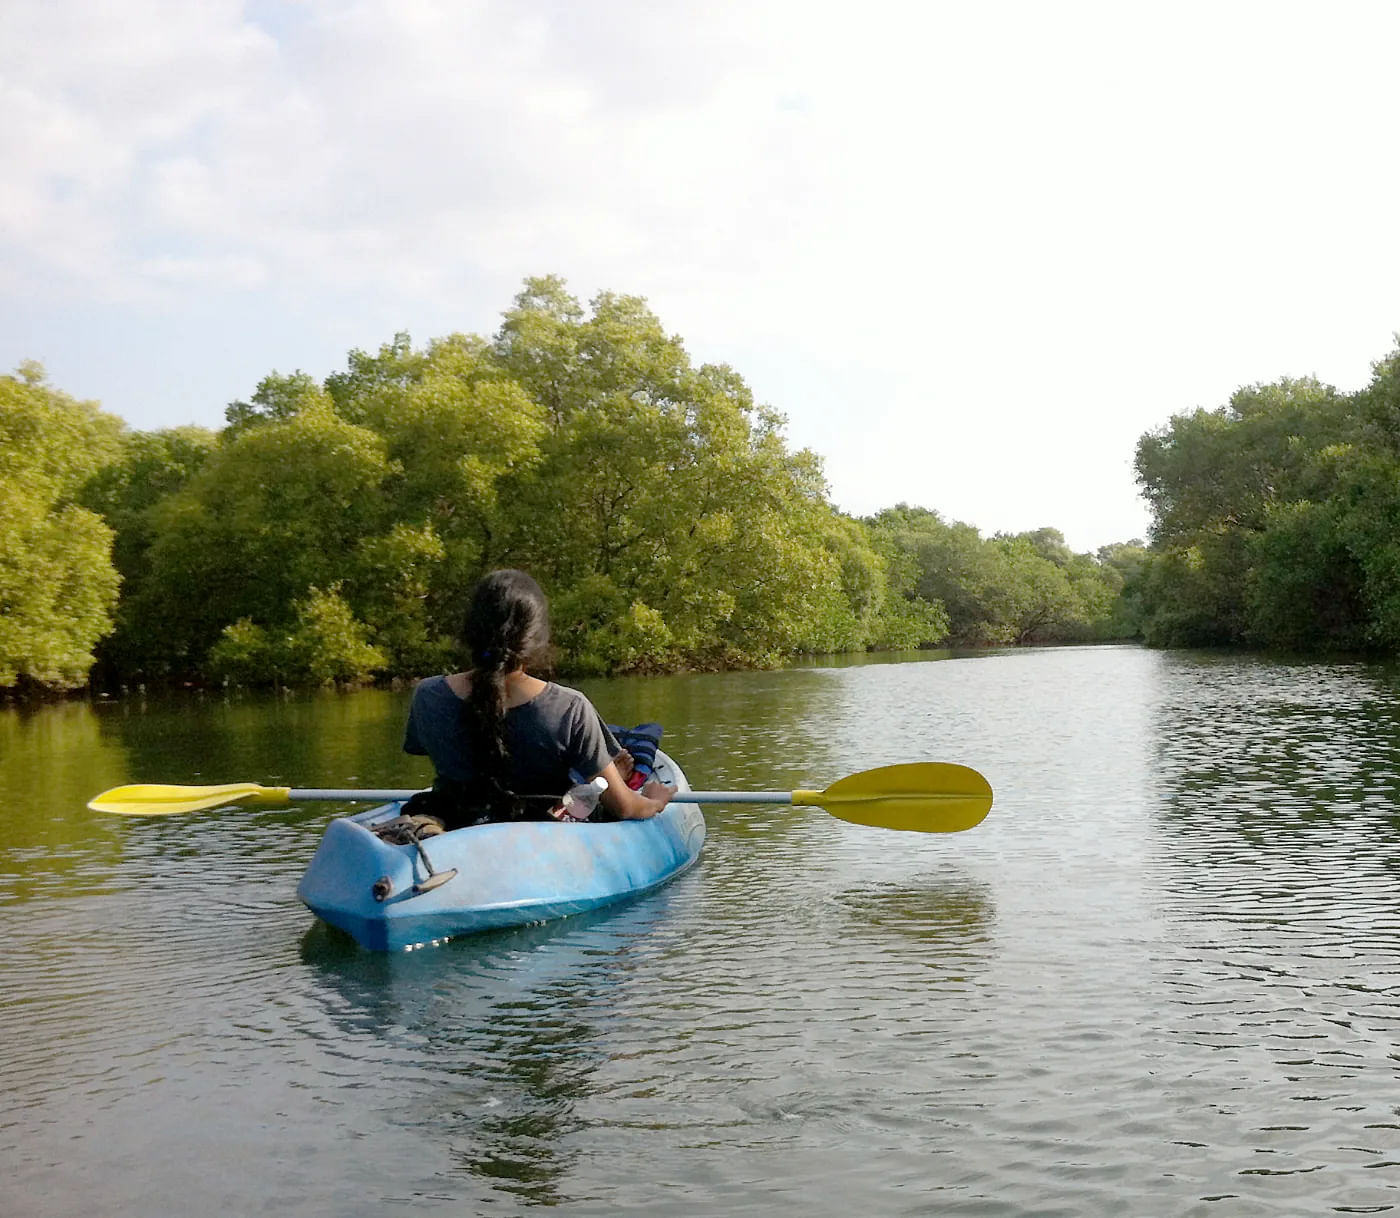 Kayaking in the Backwaters & Mangroves of Pondy